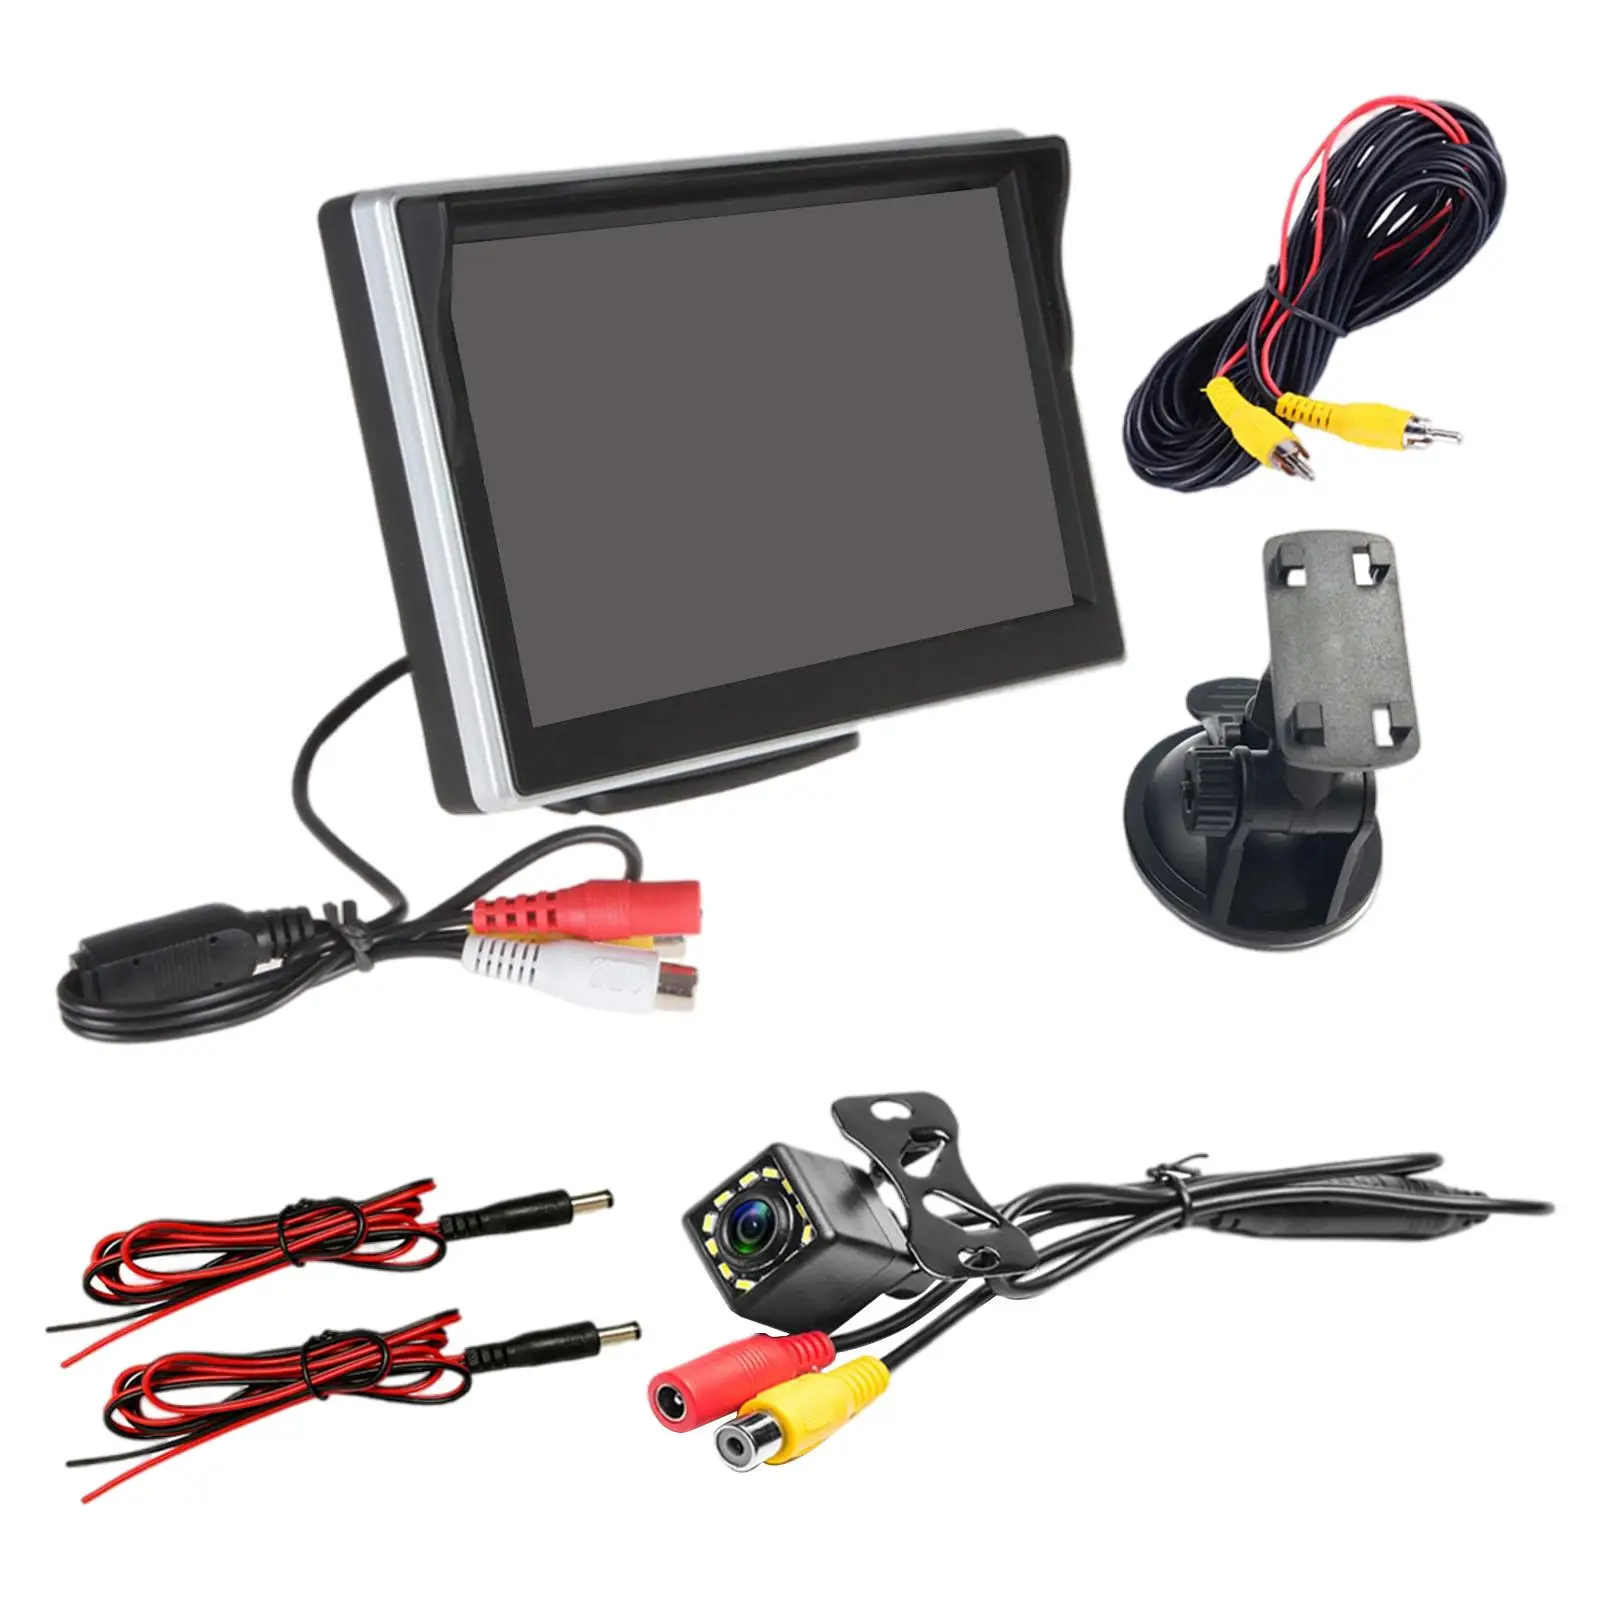 5-Inch 12 LED Car Monitor Camera Super Slim Rear View Camera System Fit for Camper